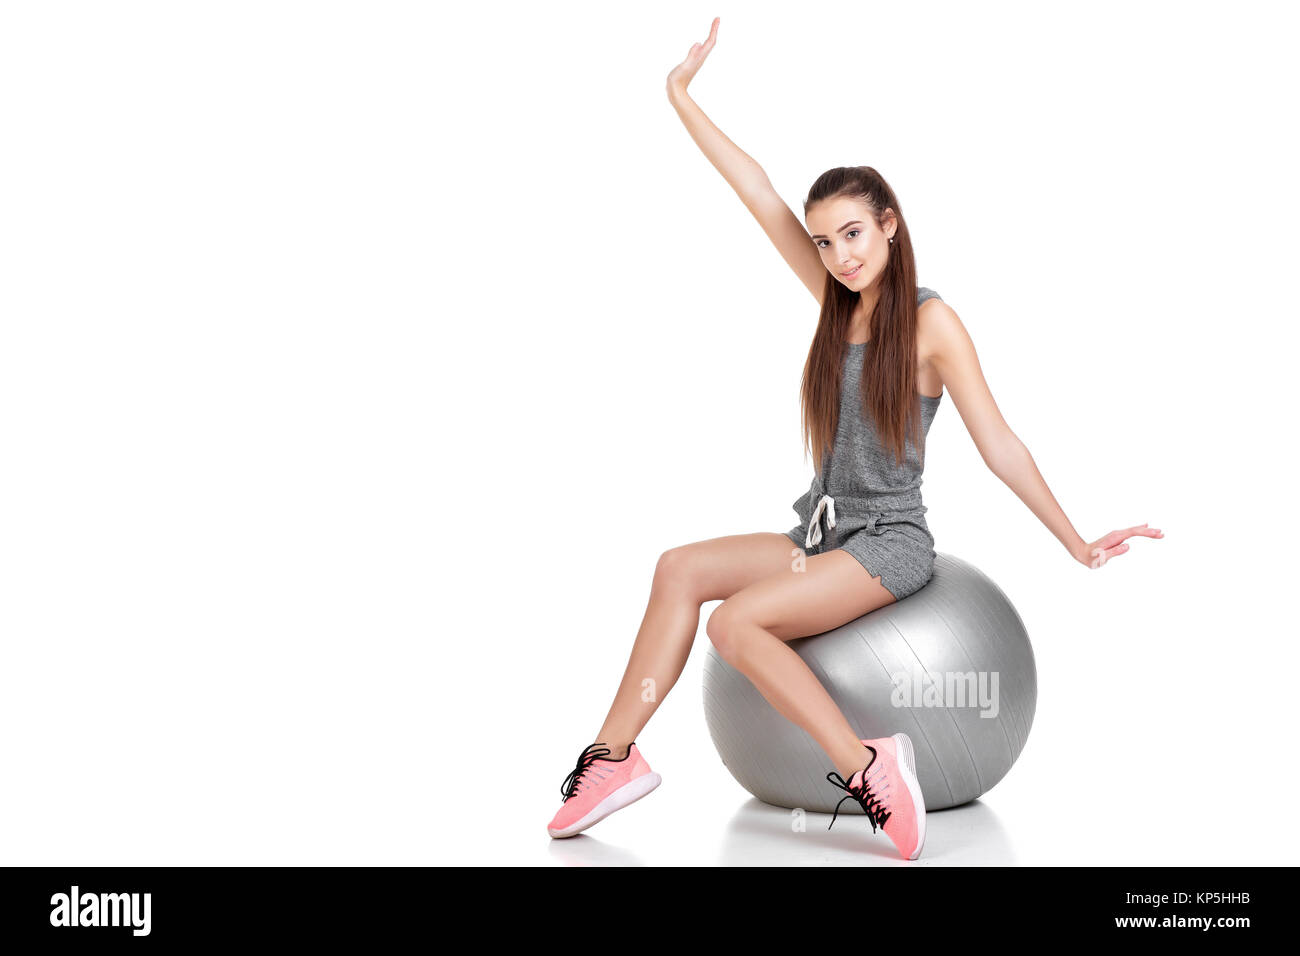 woman in sports clothes with fitness ball Stock Photo